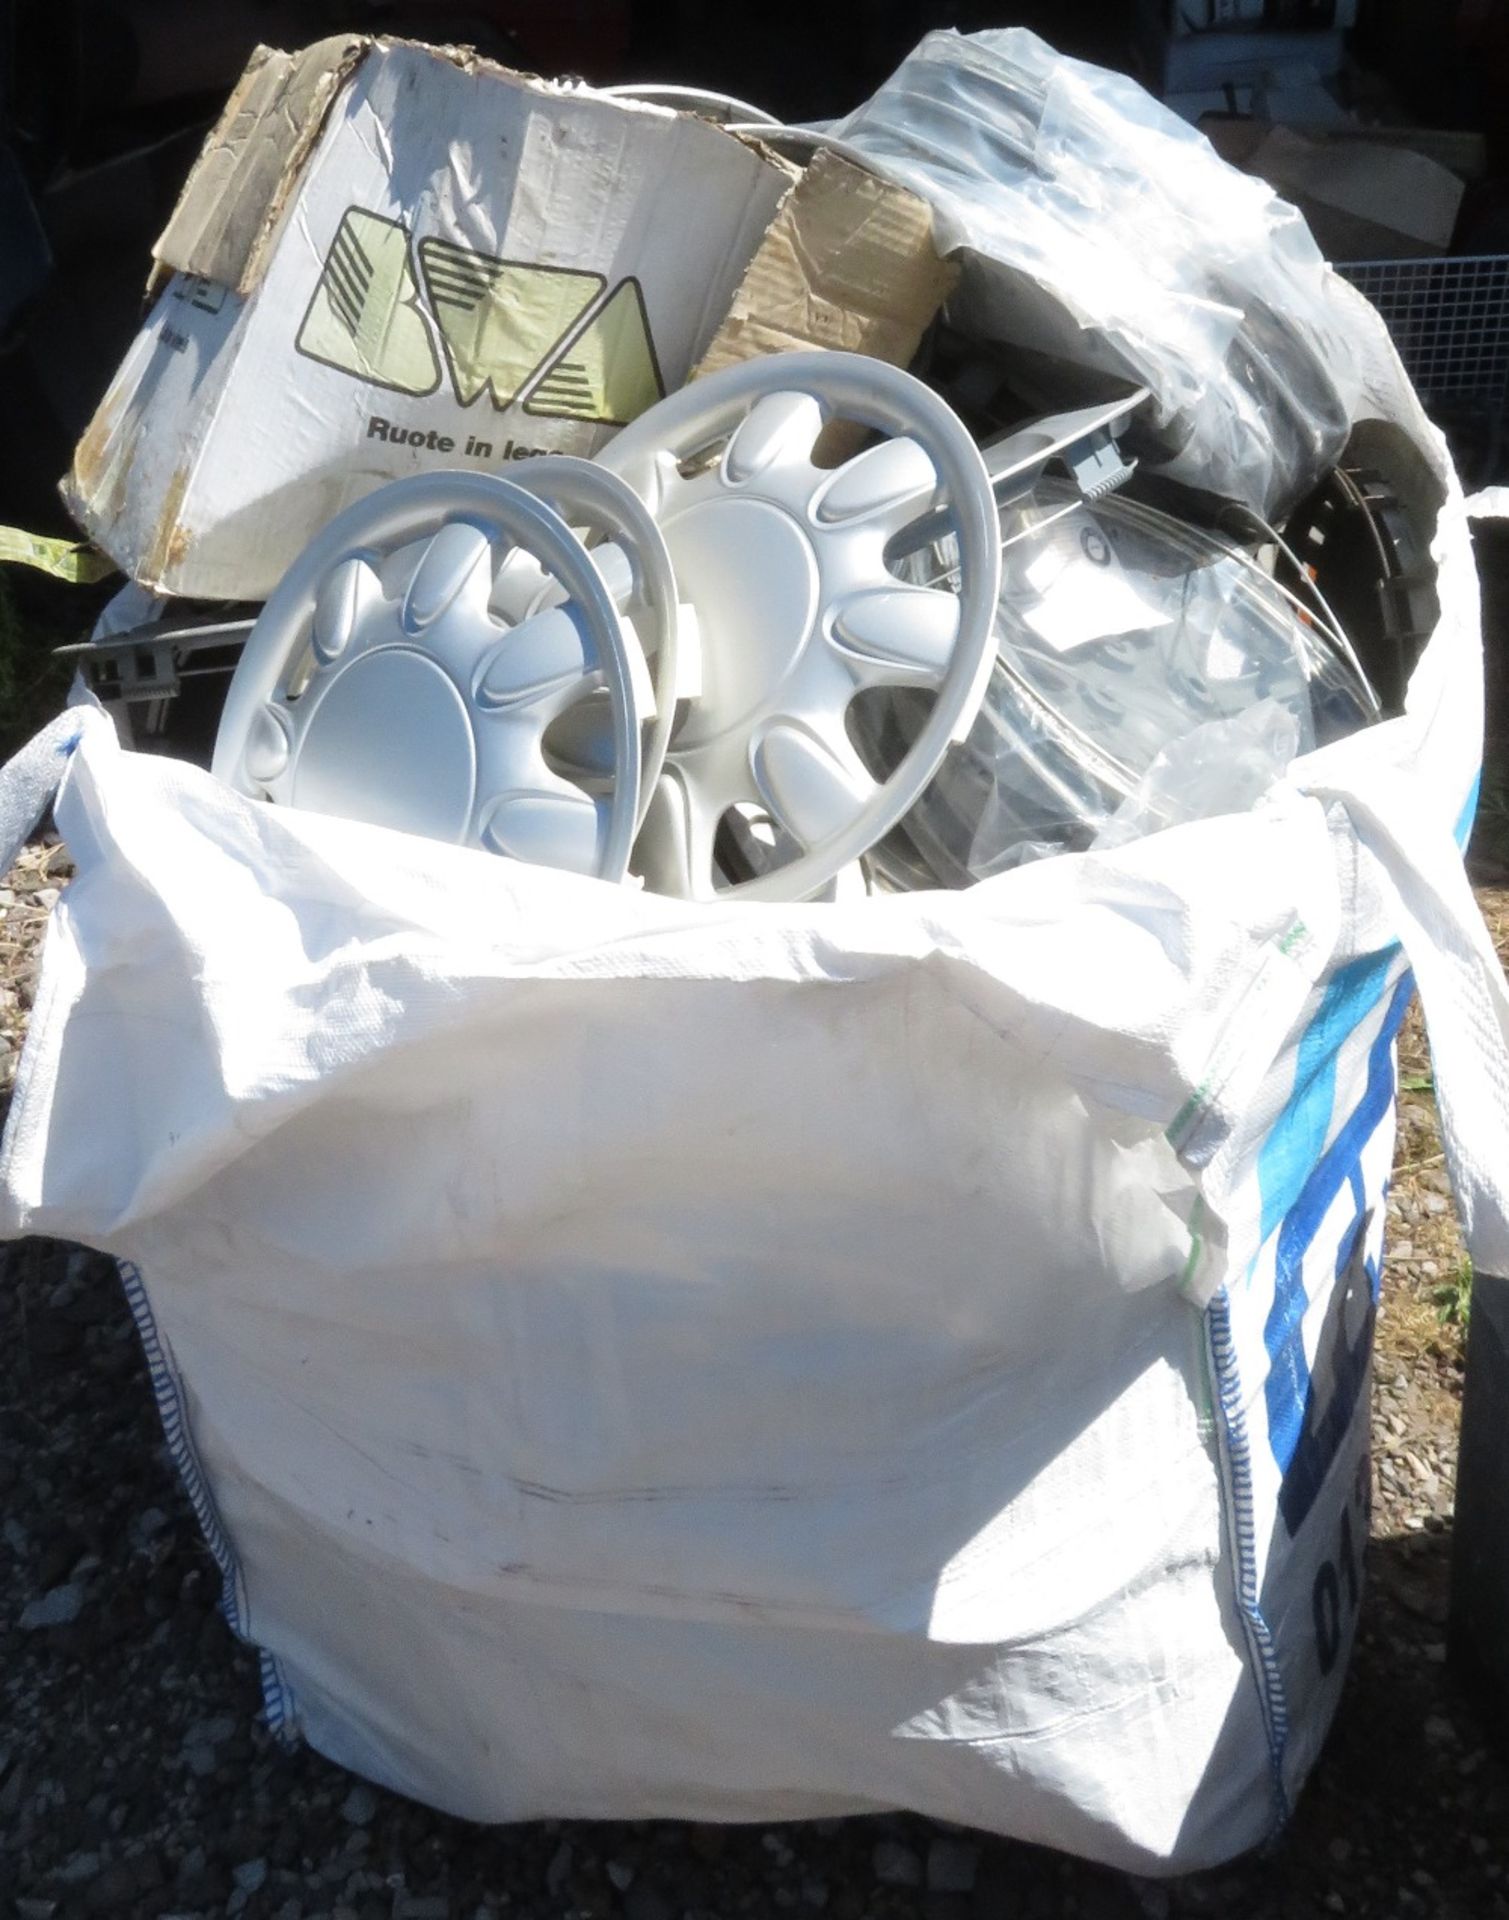 Large sack of new and used wheel trims as well as large black container also with used wheel trim